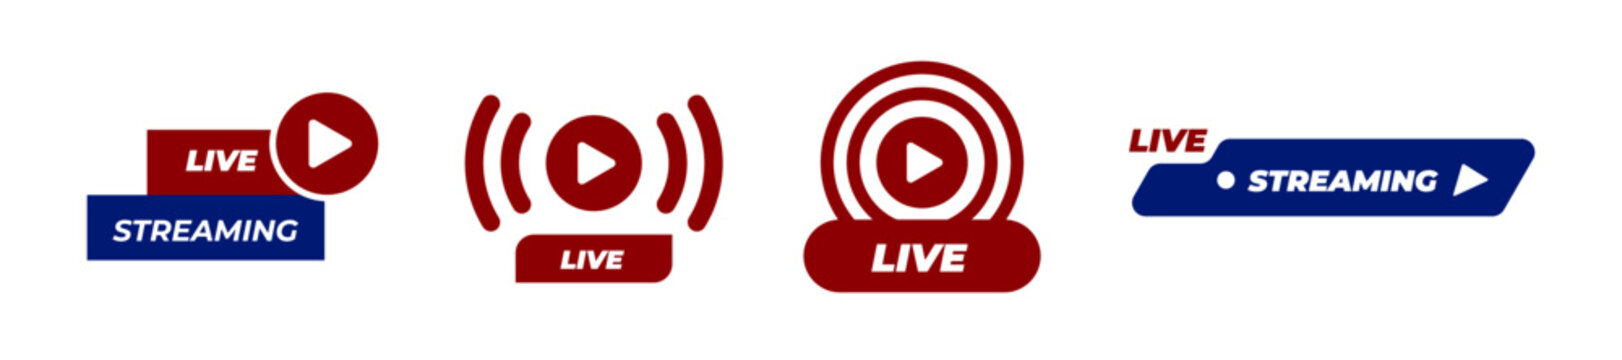 live icon. live streaming vector. live stream for web design - stock vector.